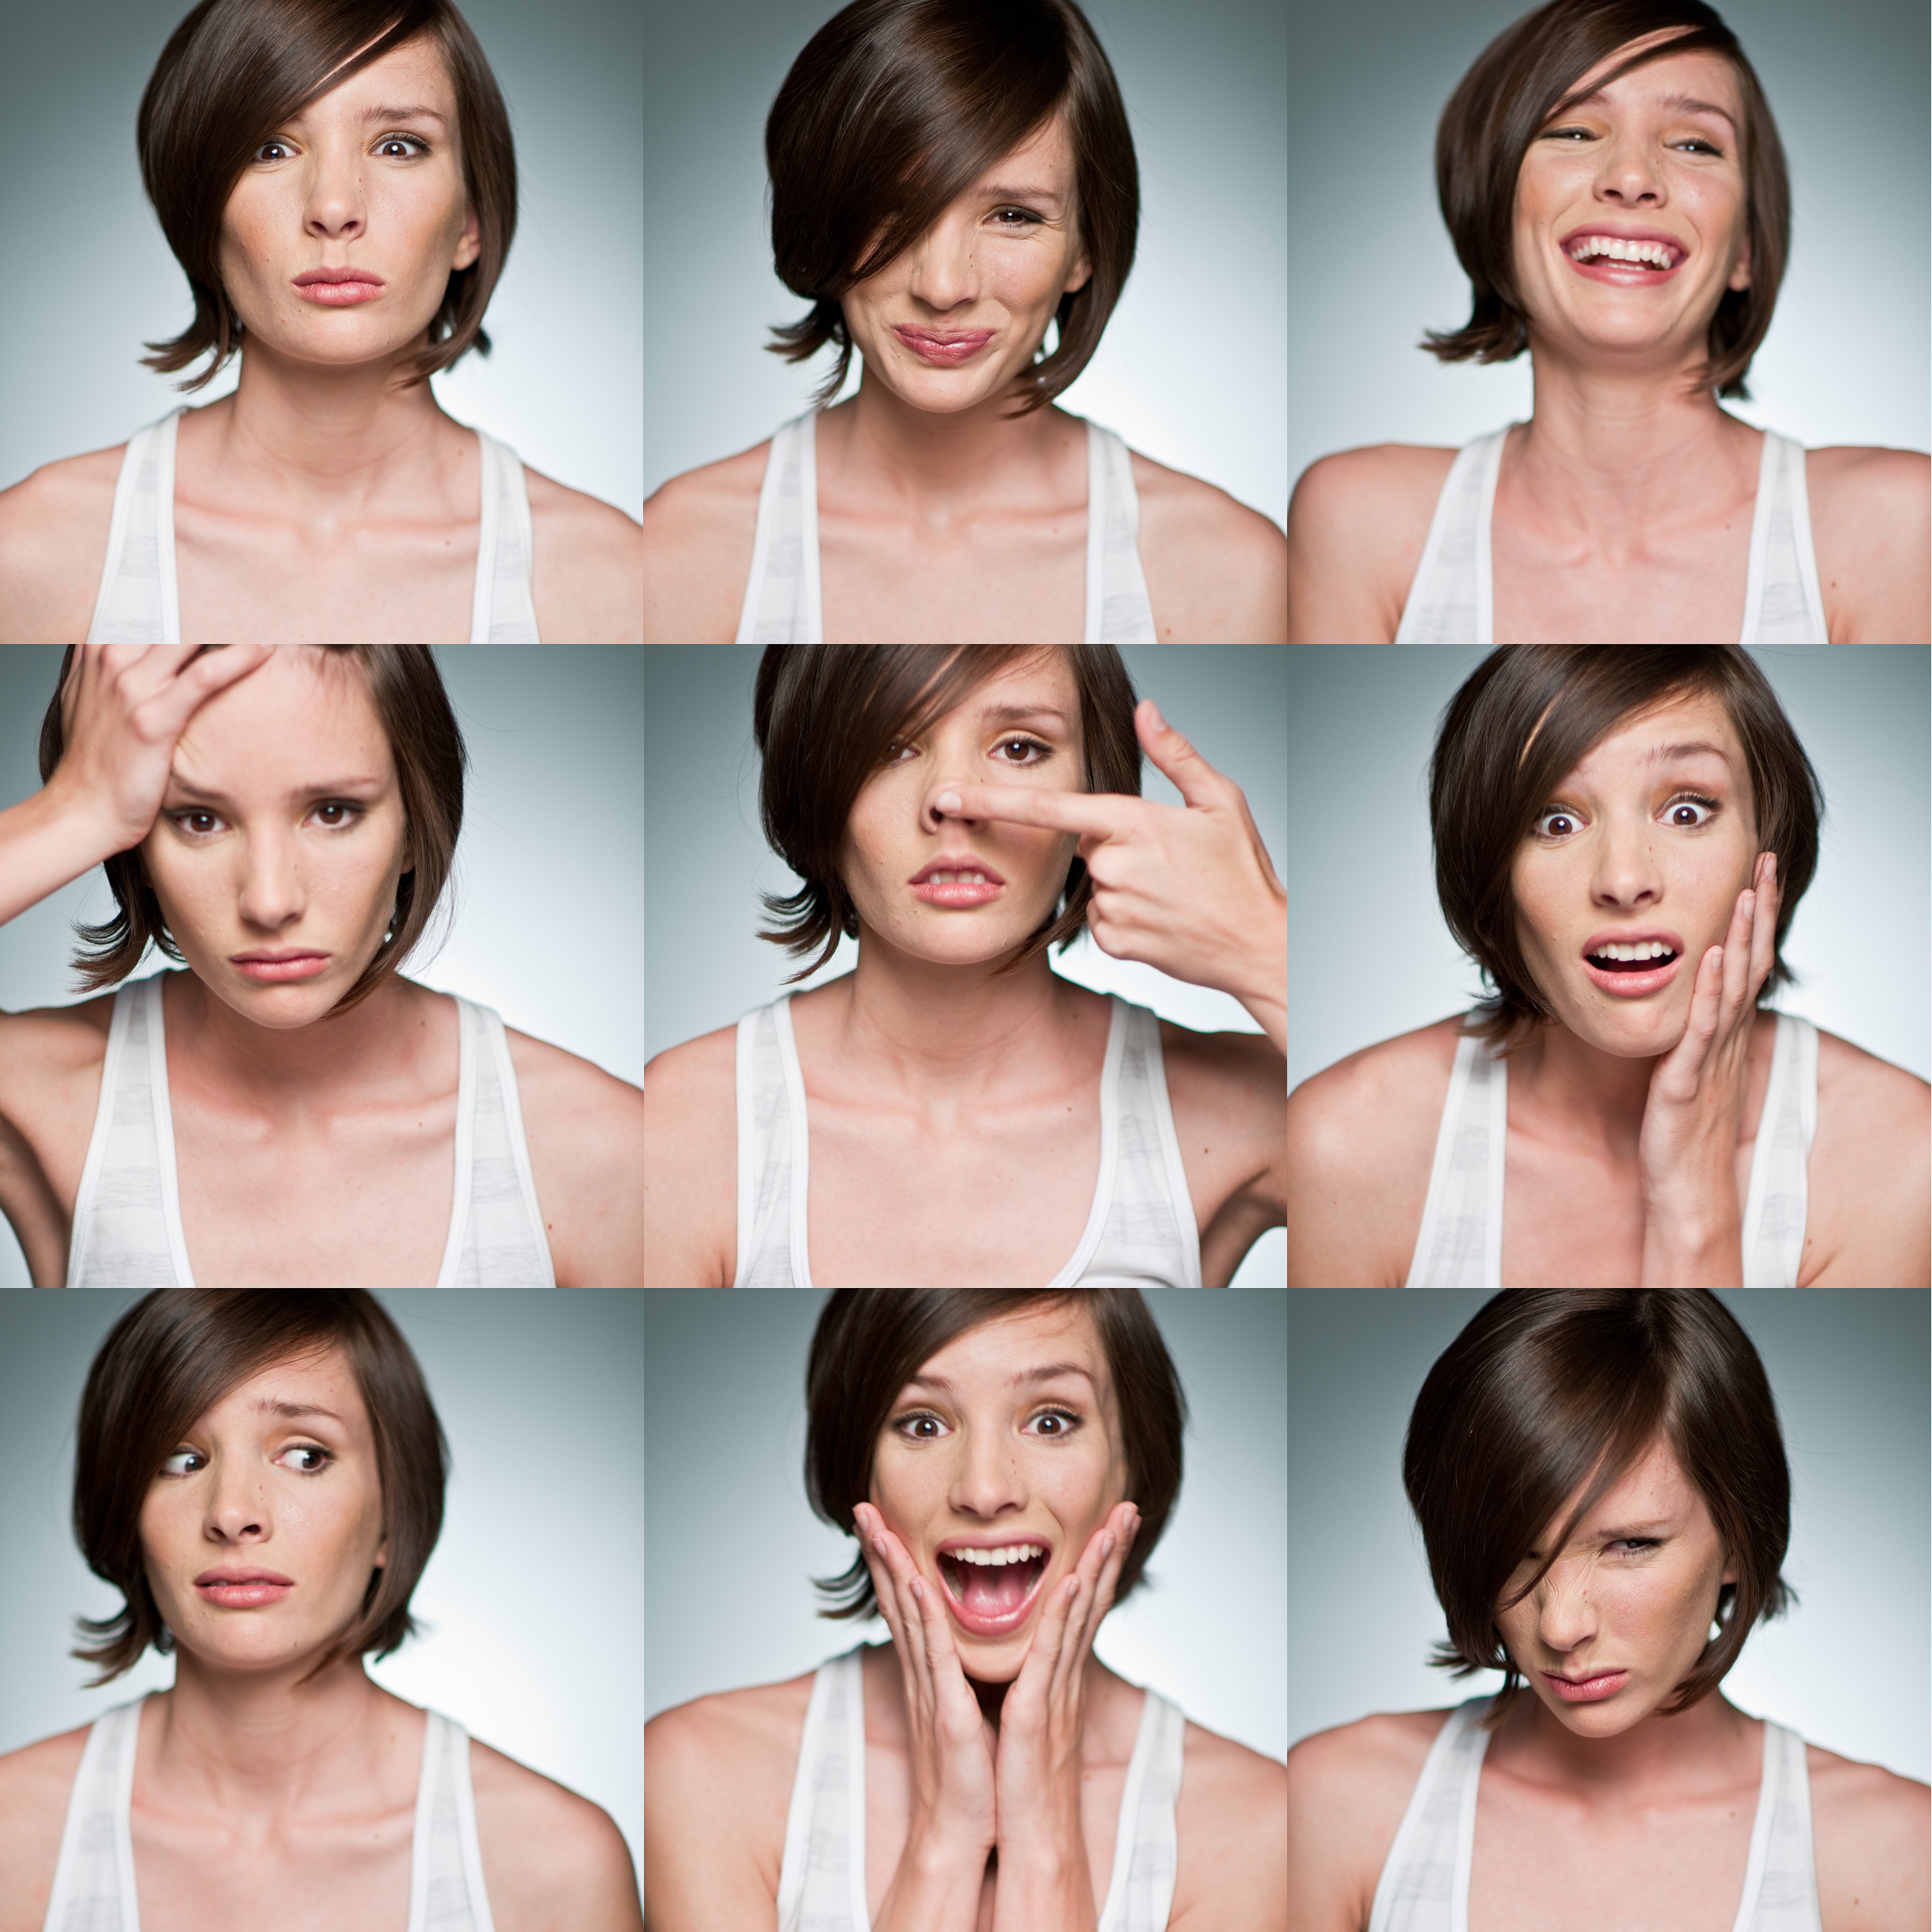 The Many Faces of Megan (Simon Gerzina Photography—Getty Images/Flickr RF)